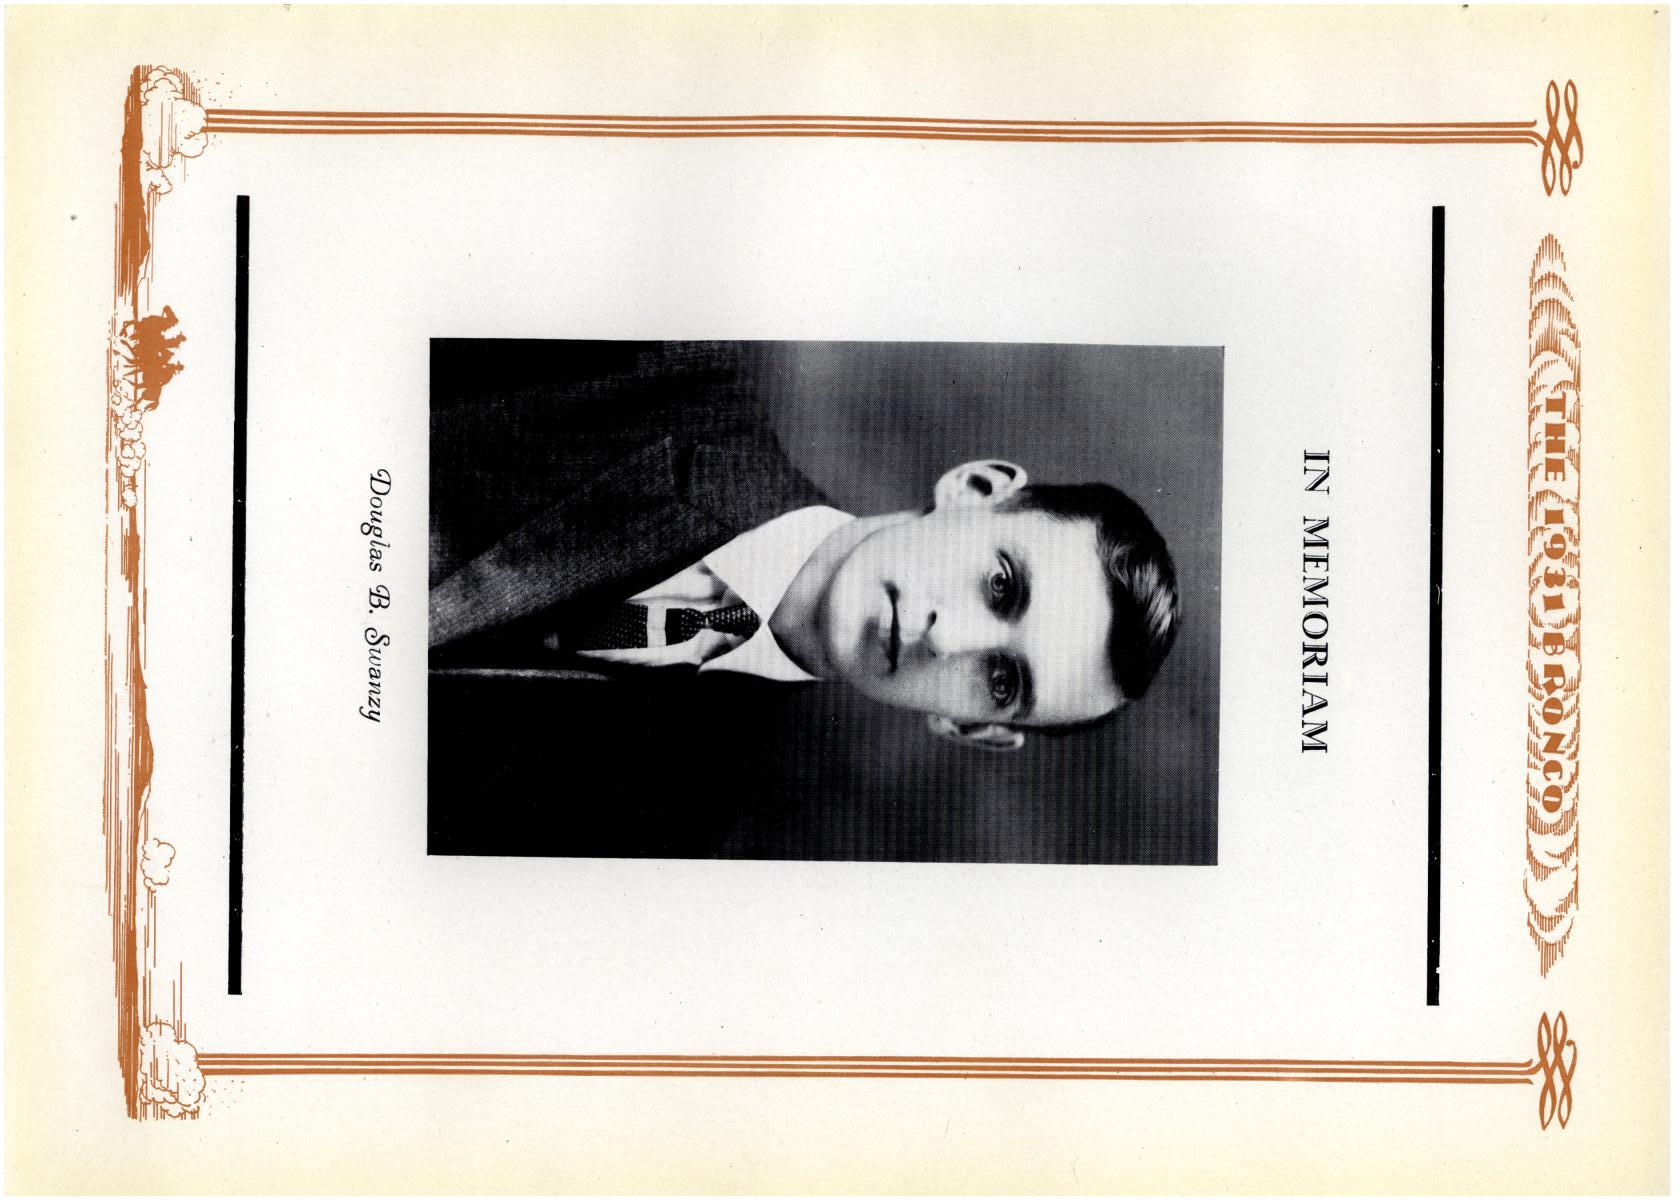 The Bronco, Yearbook of Simmons University, 1931
                                                
                                                    33
                                                